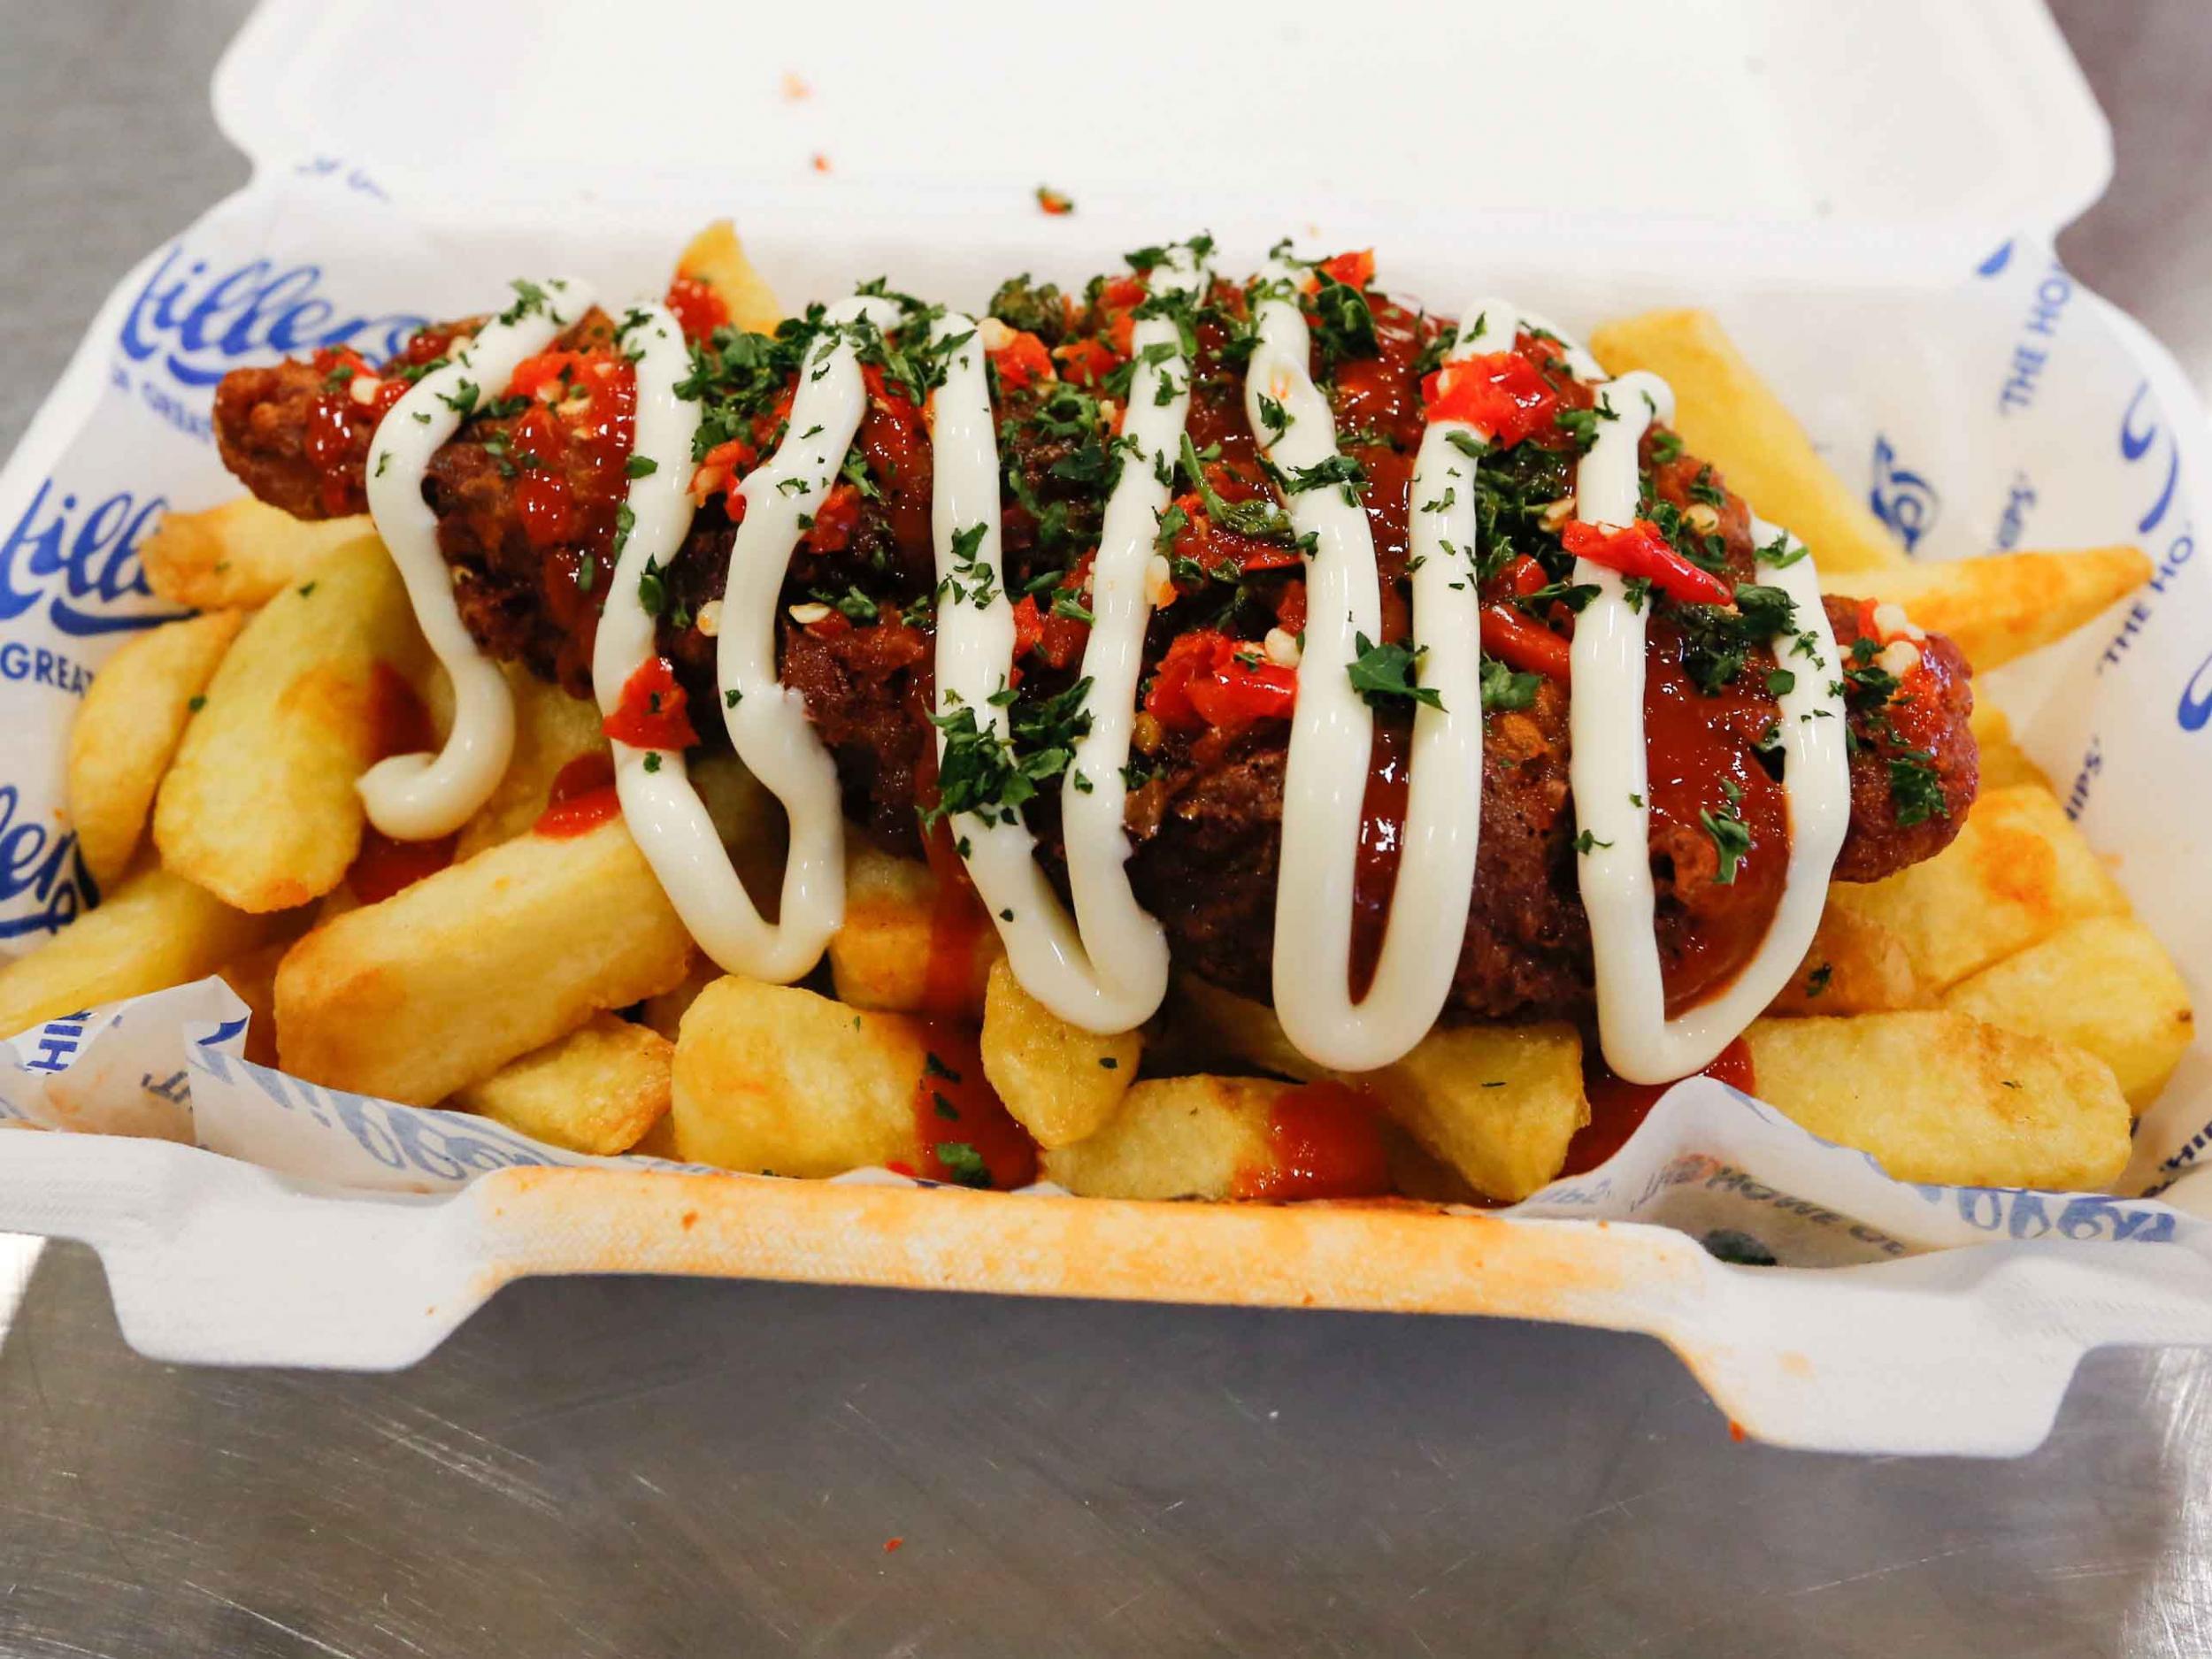 A family-run chip shop is selling what they claim is the world’s spiciest fish and chips (SWNS)